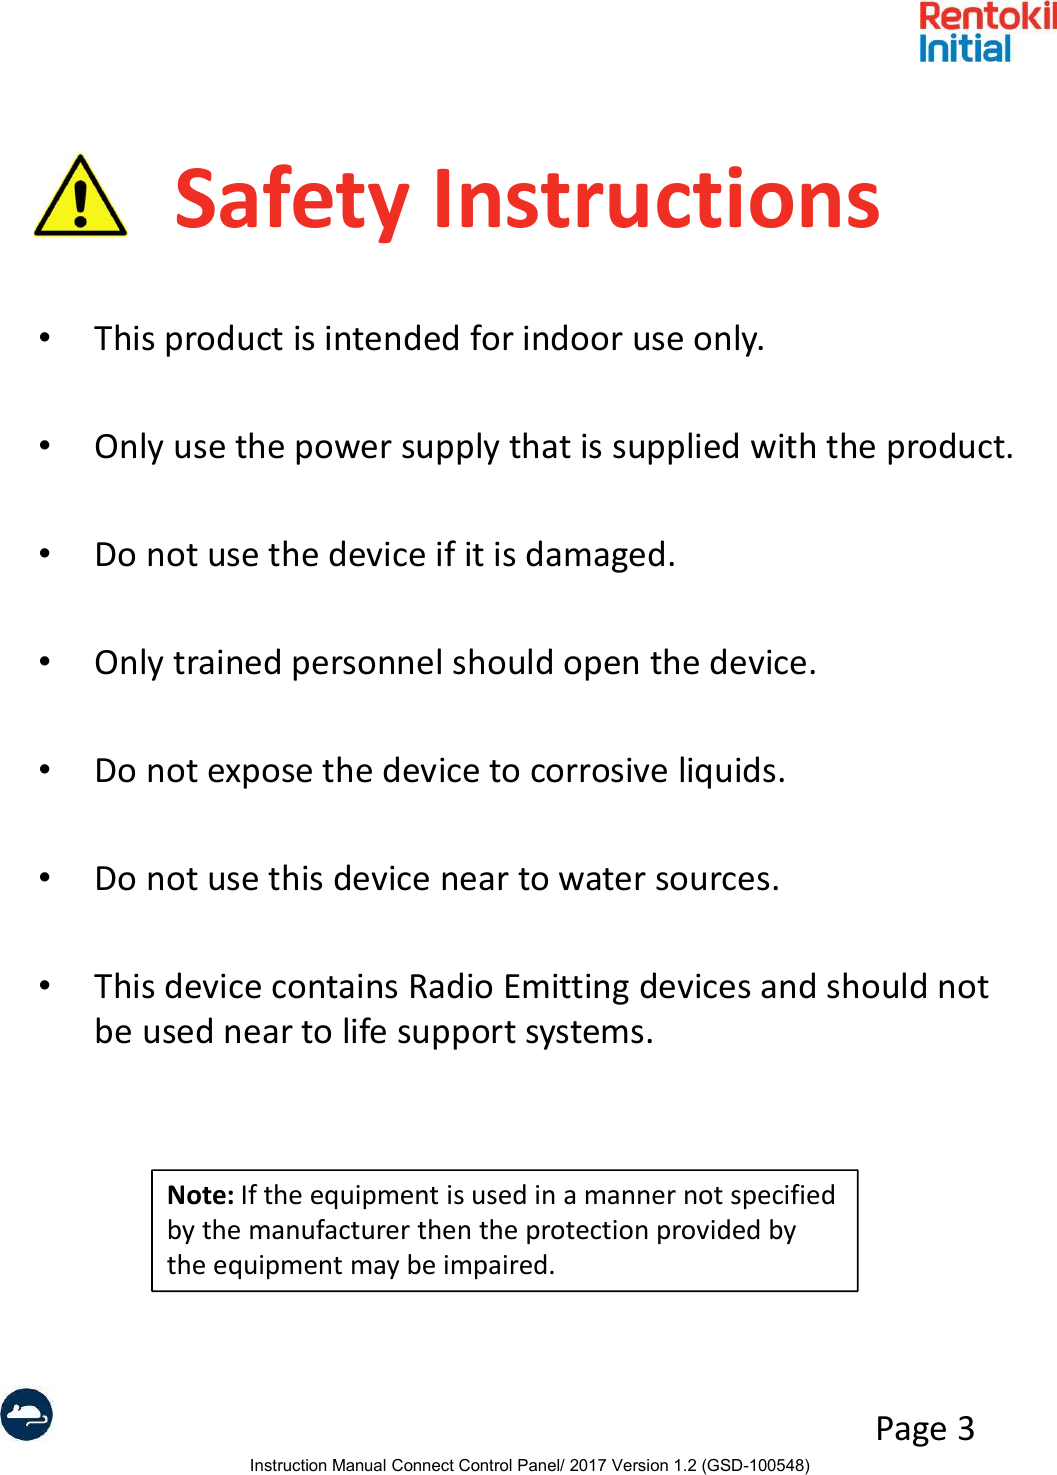 Instruction Manual Connect Control Panel/ 2017 Version 1.2 (GSD-100548)Page 3Safety Instructions•This product is intended for indoor use only.•Only use the power supply that is supplied with the product.•Do not use the device if it is damaged.•Only trained personnel should open the device. •Do not expose the device to corrosive liquids.•Do not use this device near to water sources.•This device contains Radio Emitting devices and should not be used near to life support systems.Note: If the equipment is used in a manner not specified by the manufacturer then the protection provided by the equipment may be impaired.